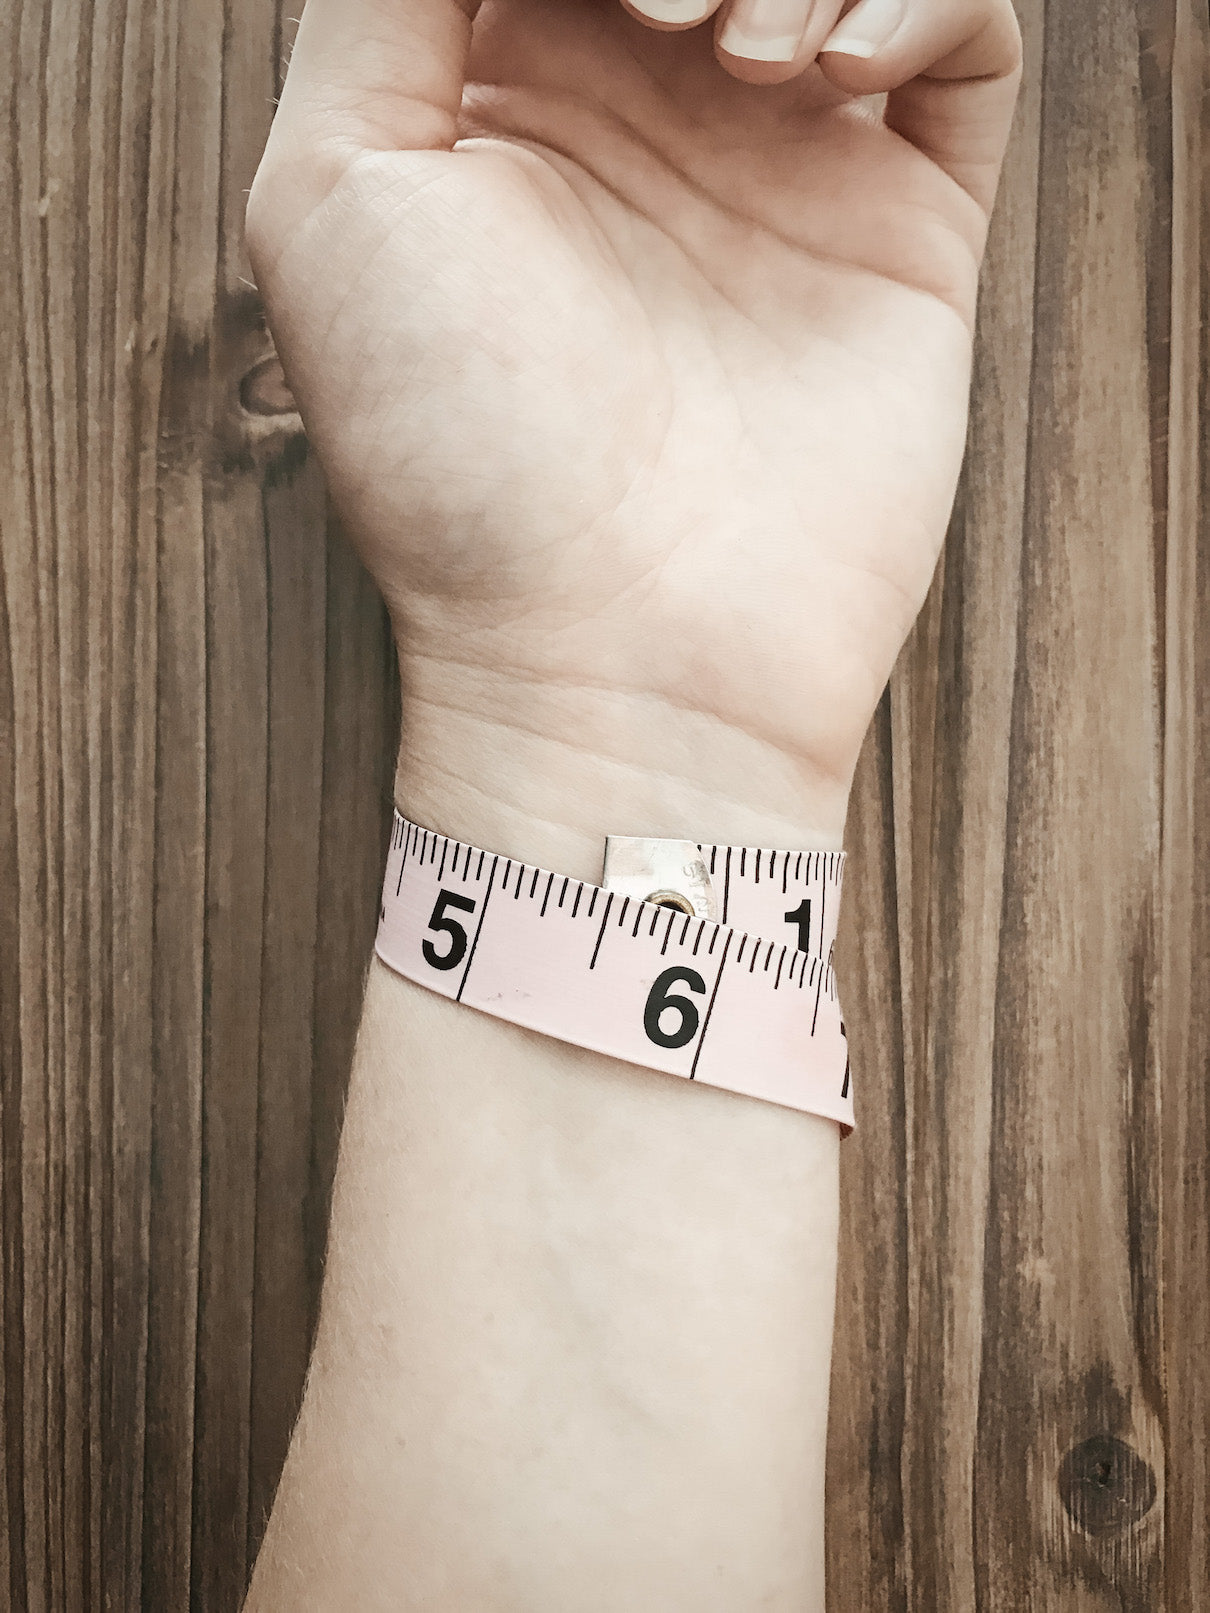 Tape measure wrapped around wrist showing 5.5" measurement